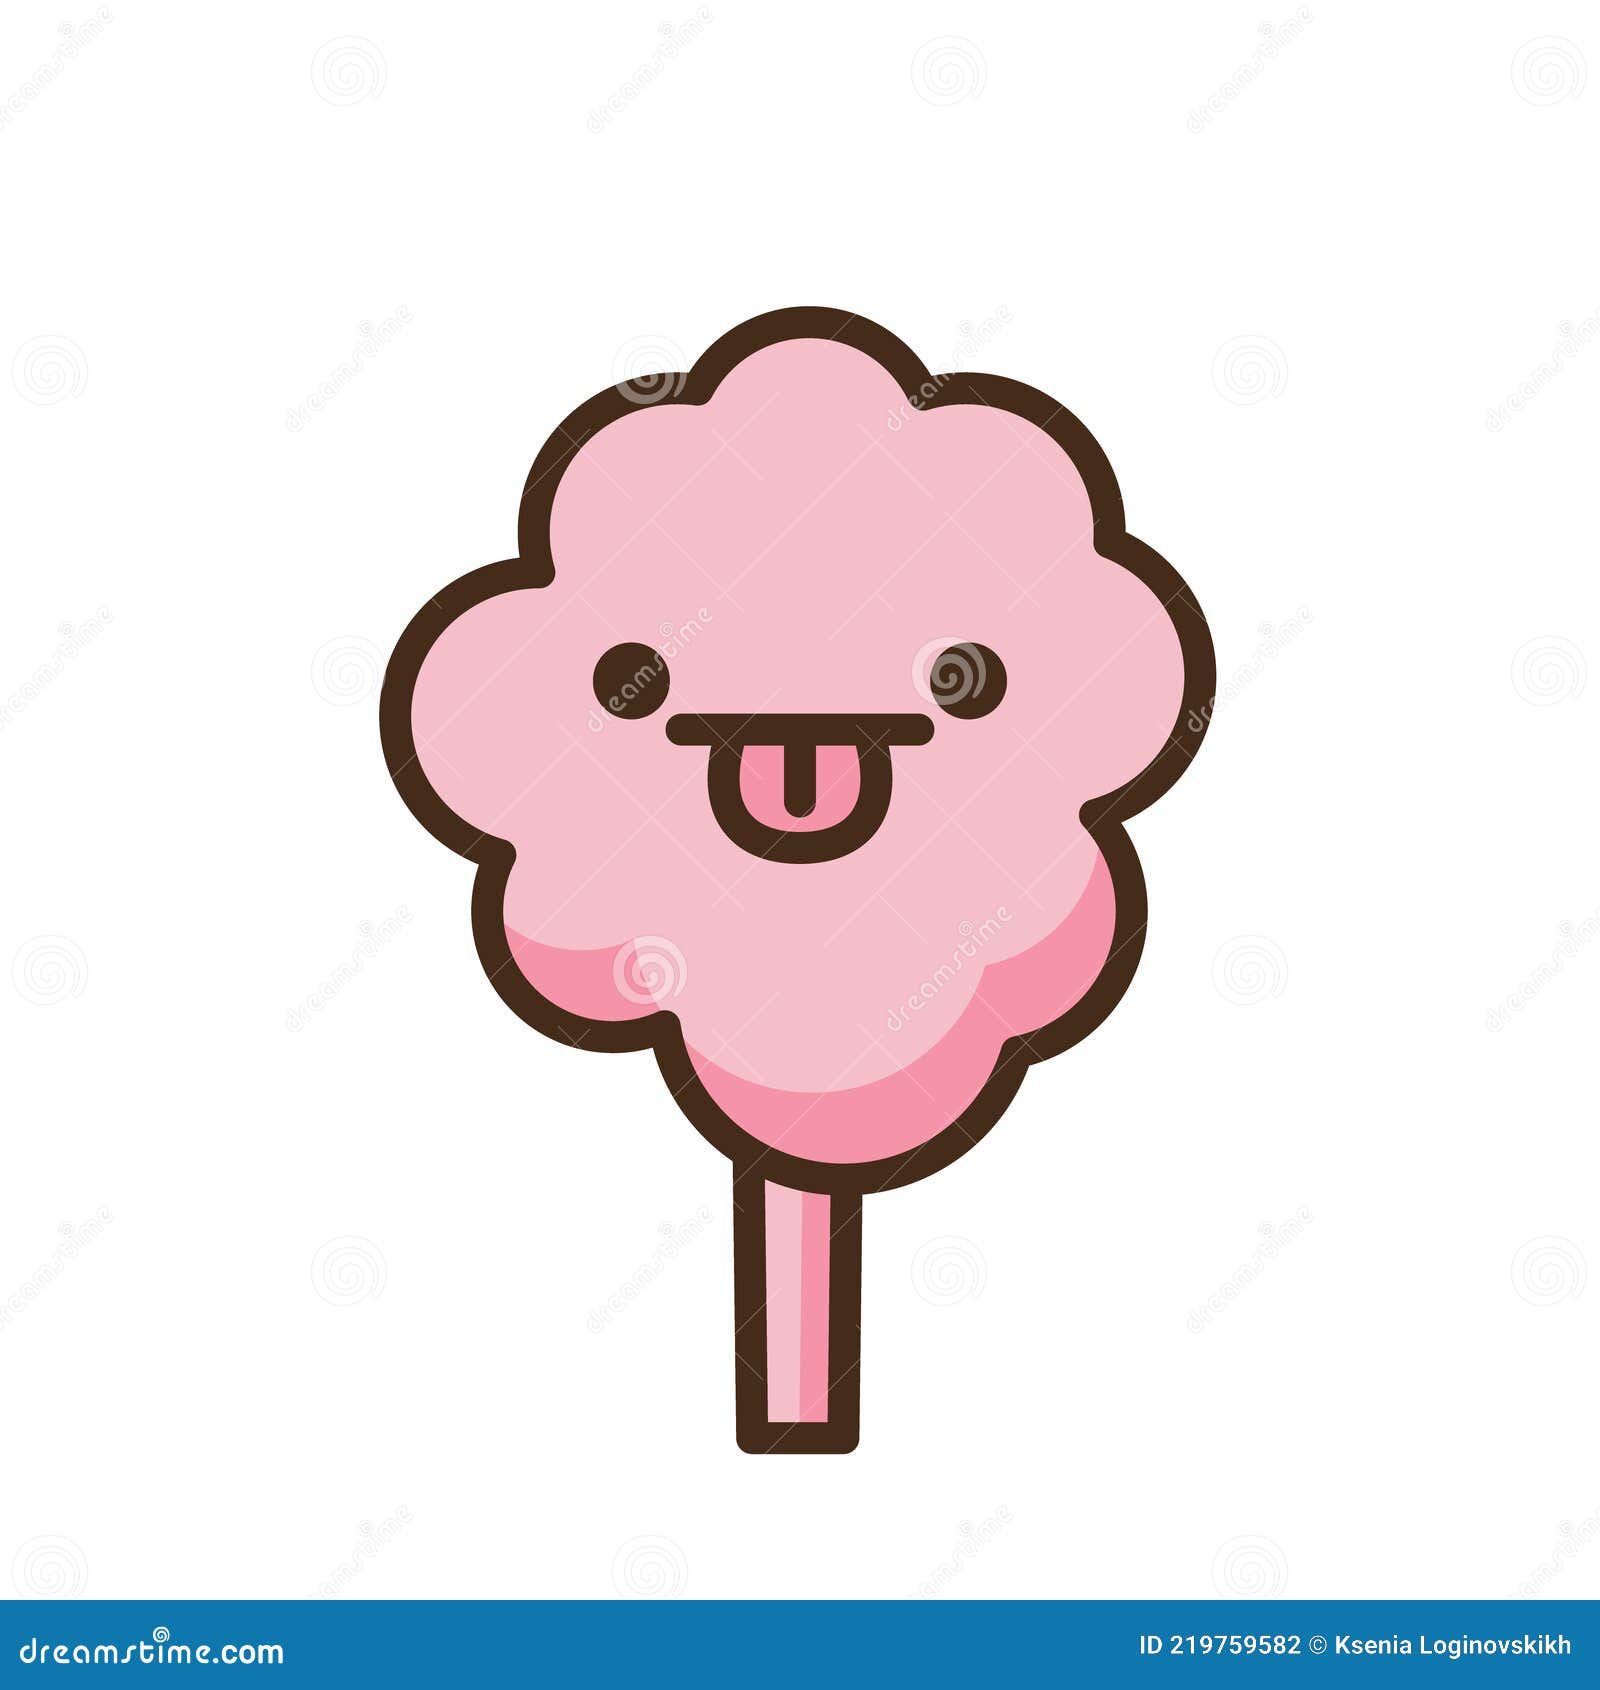 Anime Style Cartoon Sweet Food. Cotton Candy Emoji Vector Character Stock  Vector - Illustration of comic, cotton: 219759582